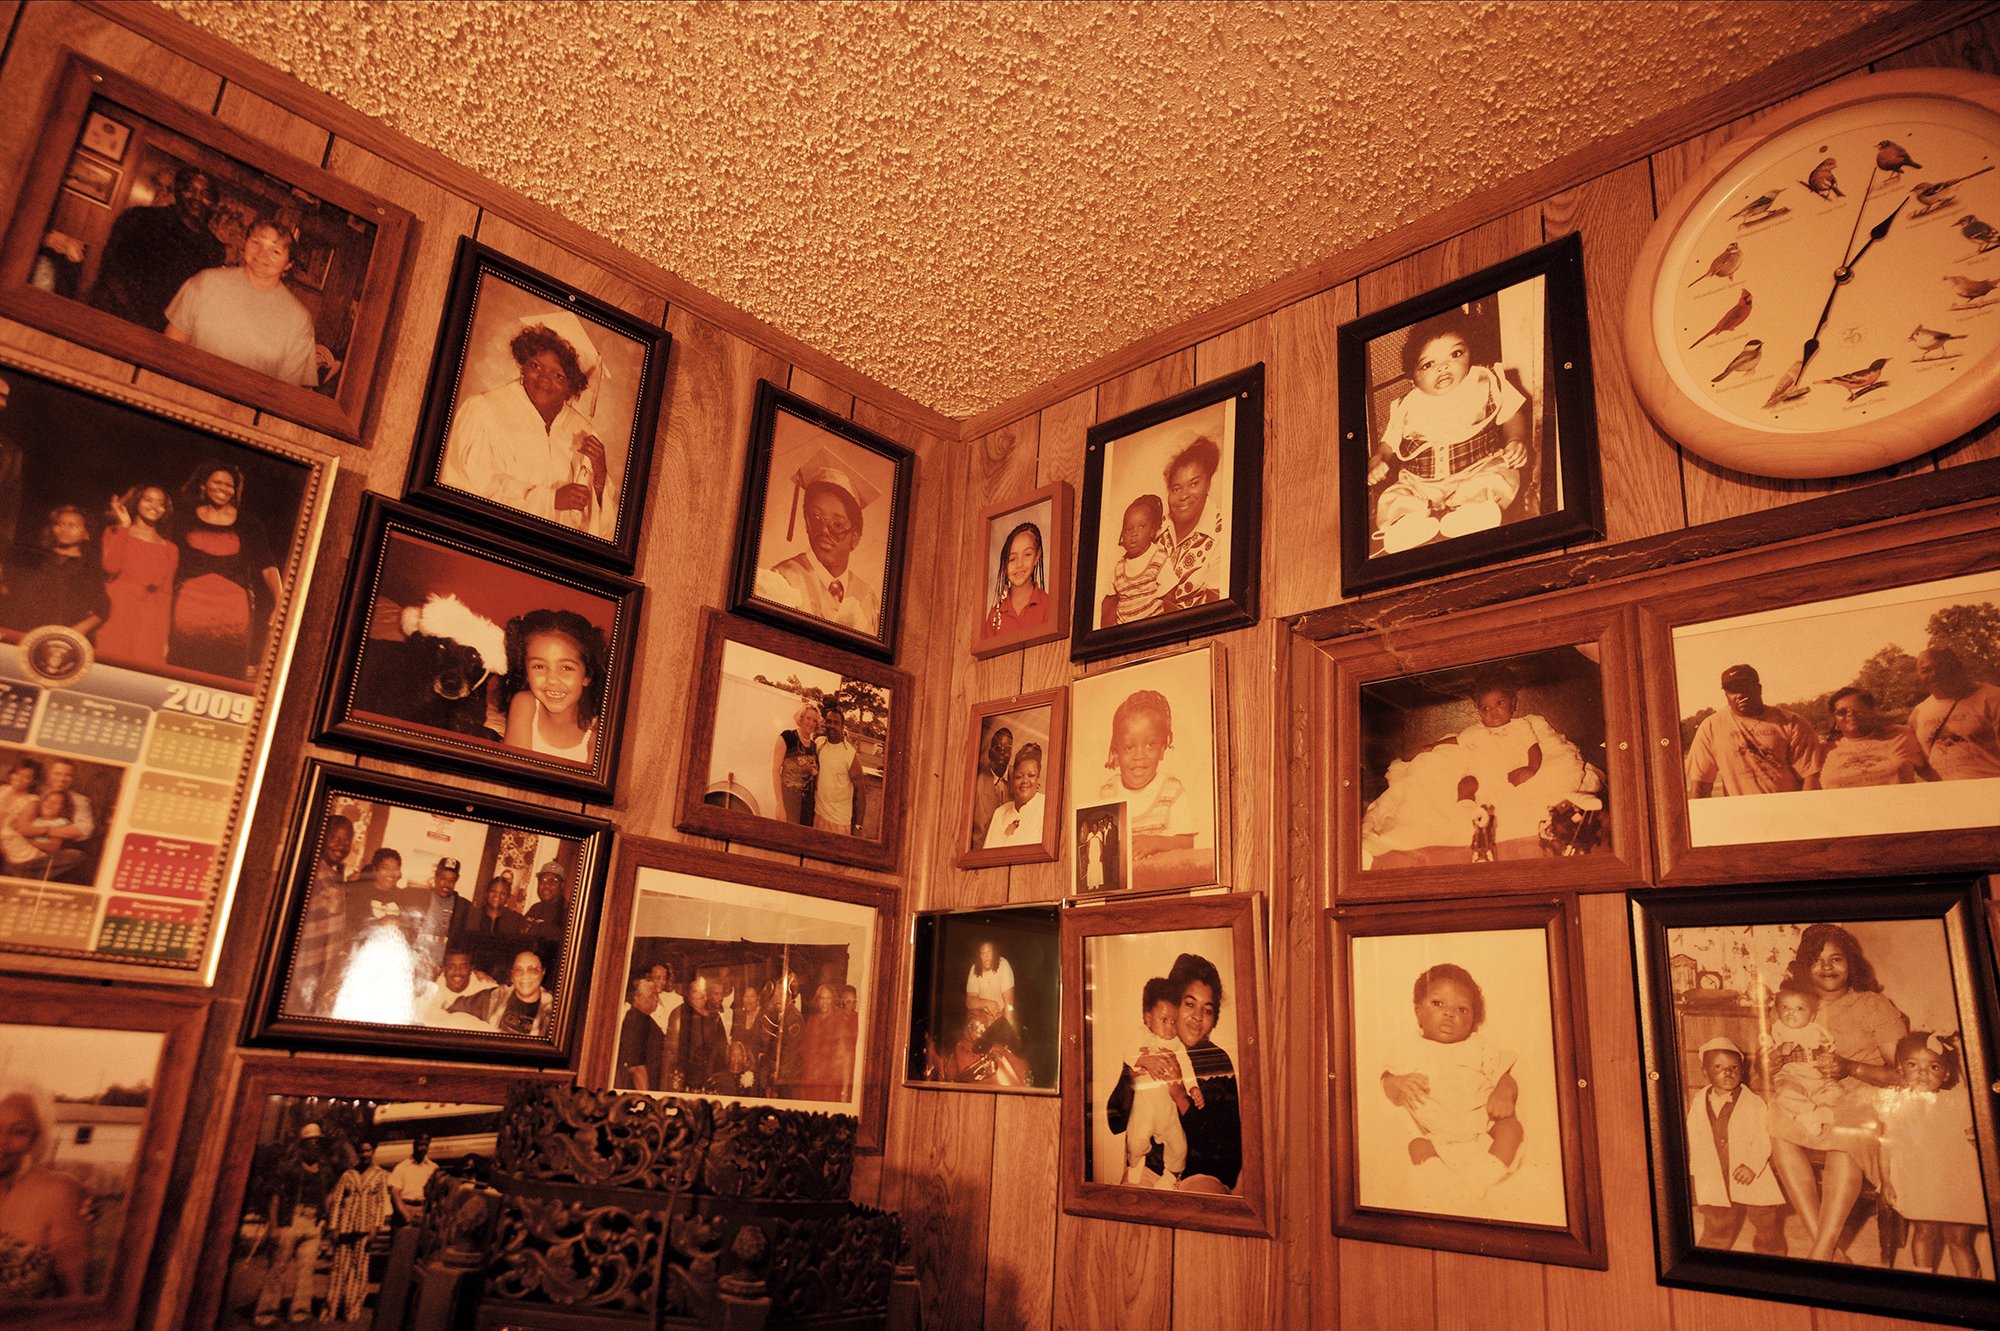 Walls covered with framed family photos.